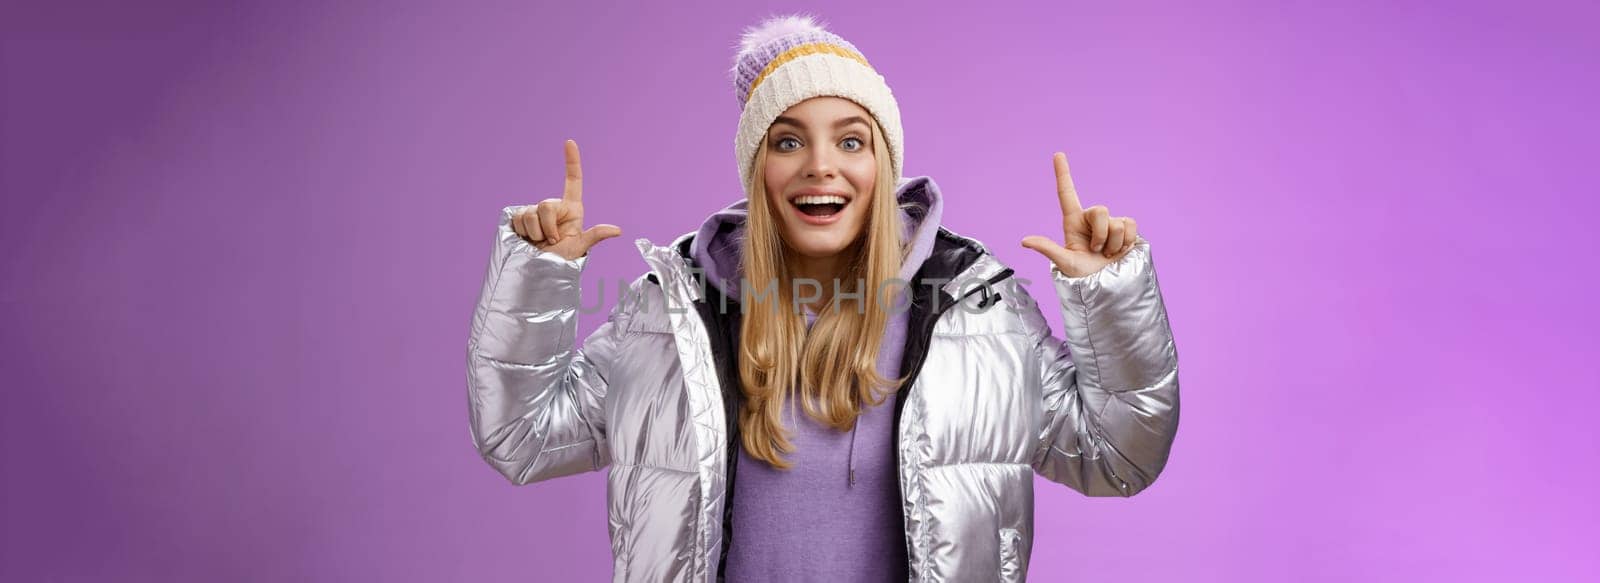 Lifestyle. Excited carefree cheerful fair-haired european girl in silver jacket winter hat raising hands pointing up have excellent idea smiling broadly speaking passionately standing purple background.